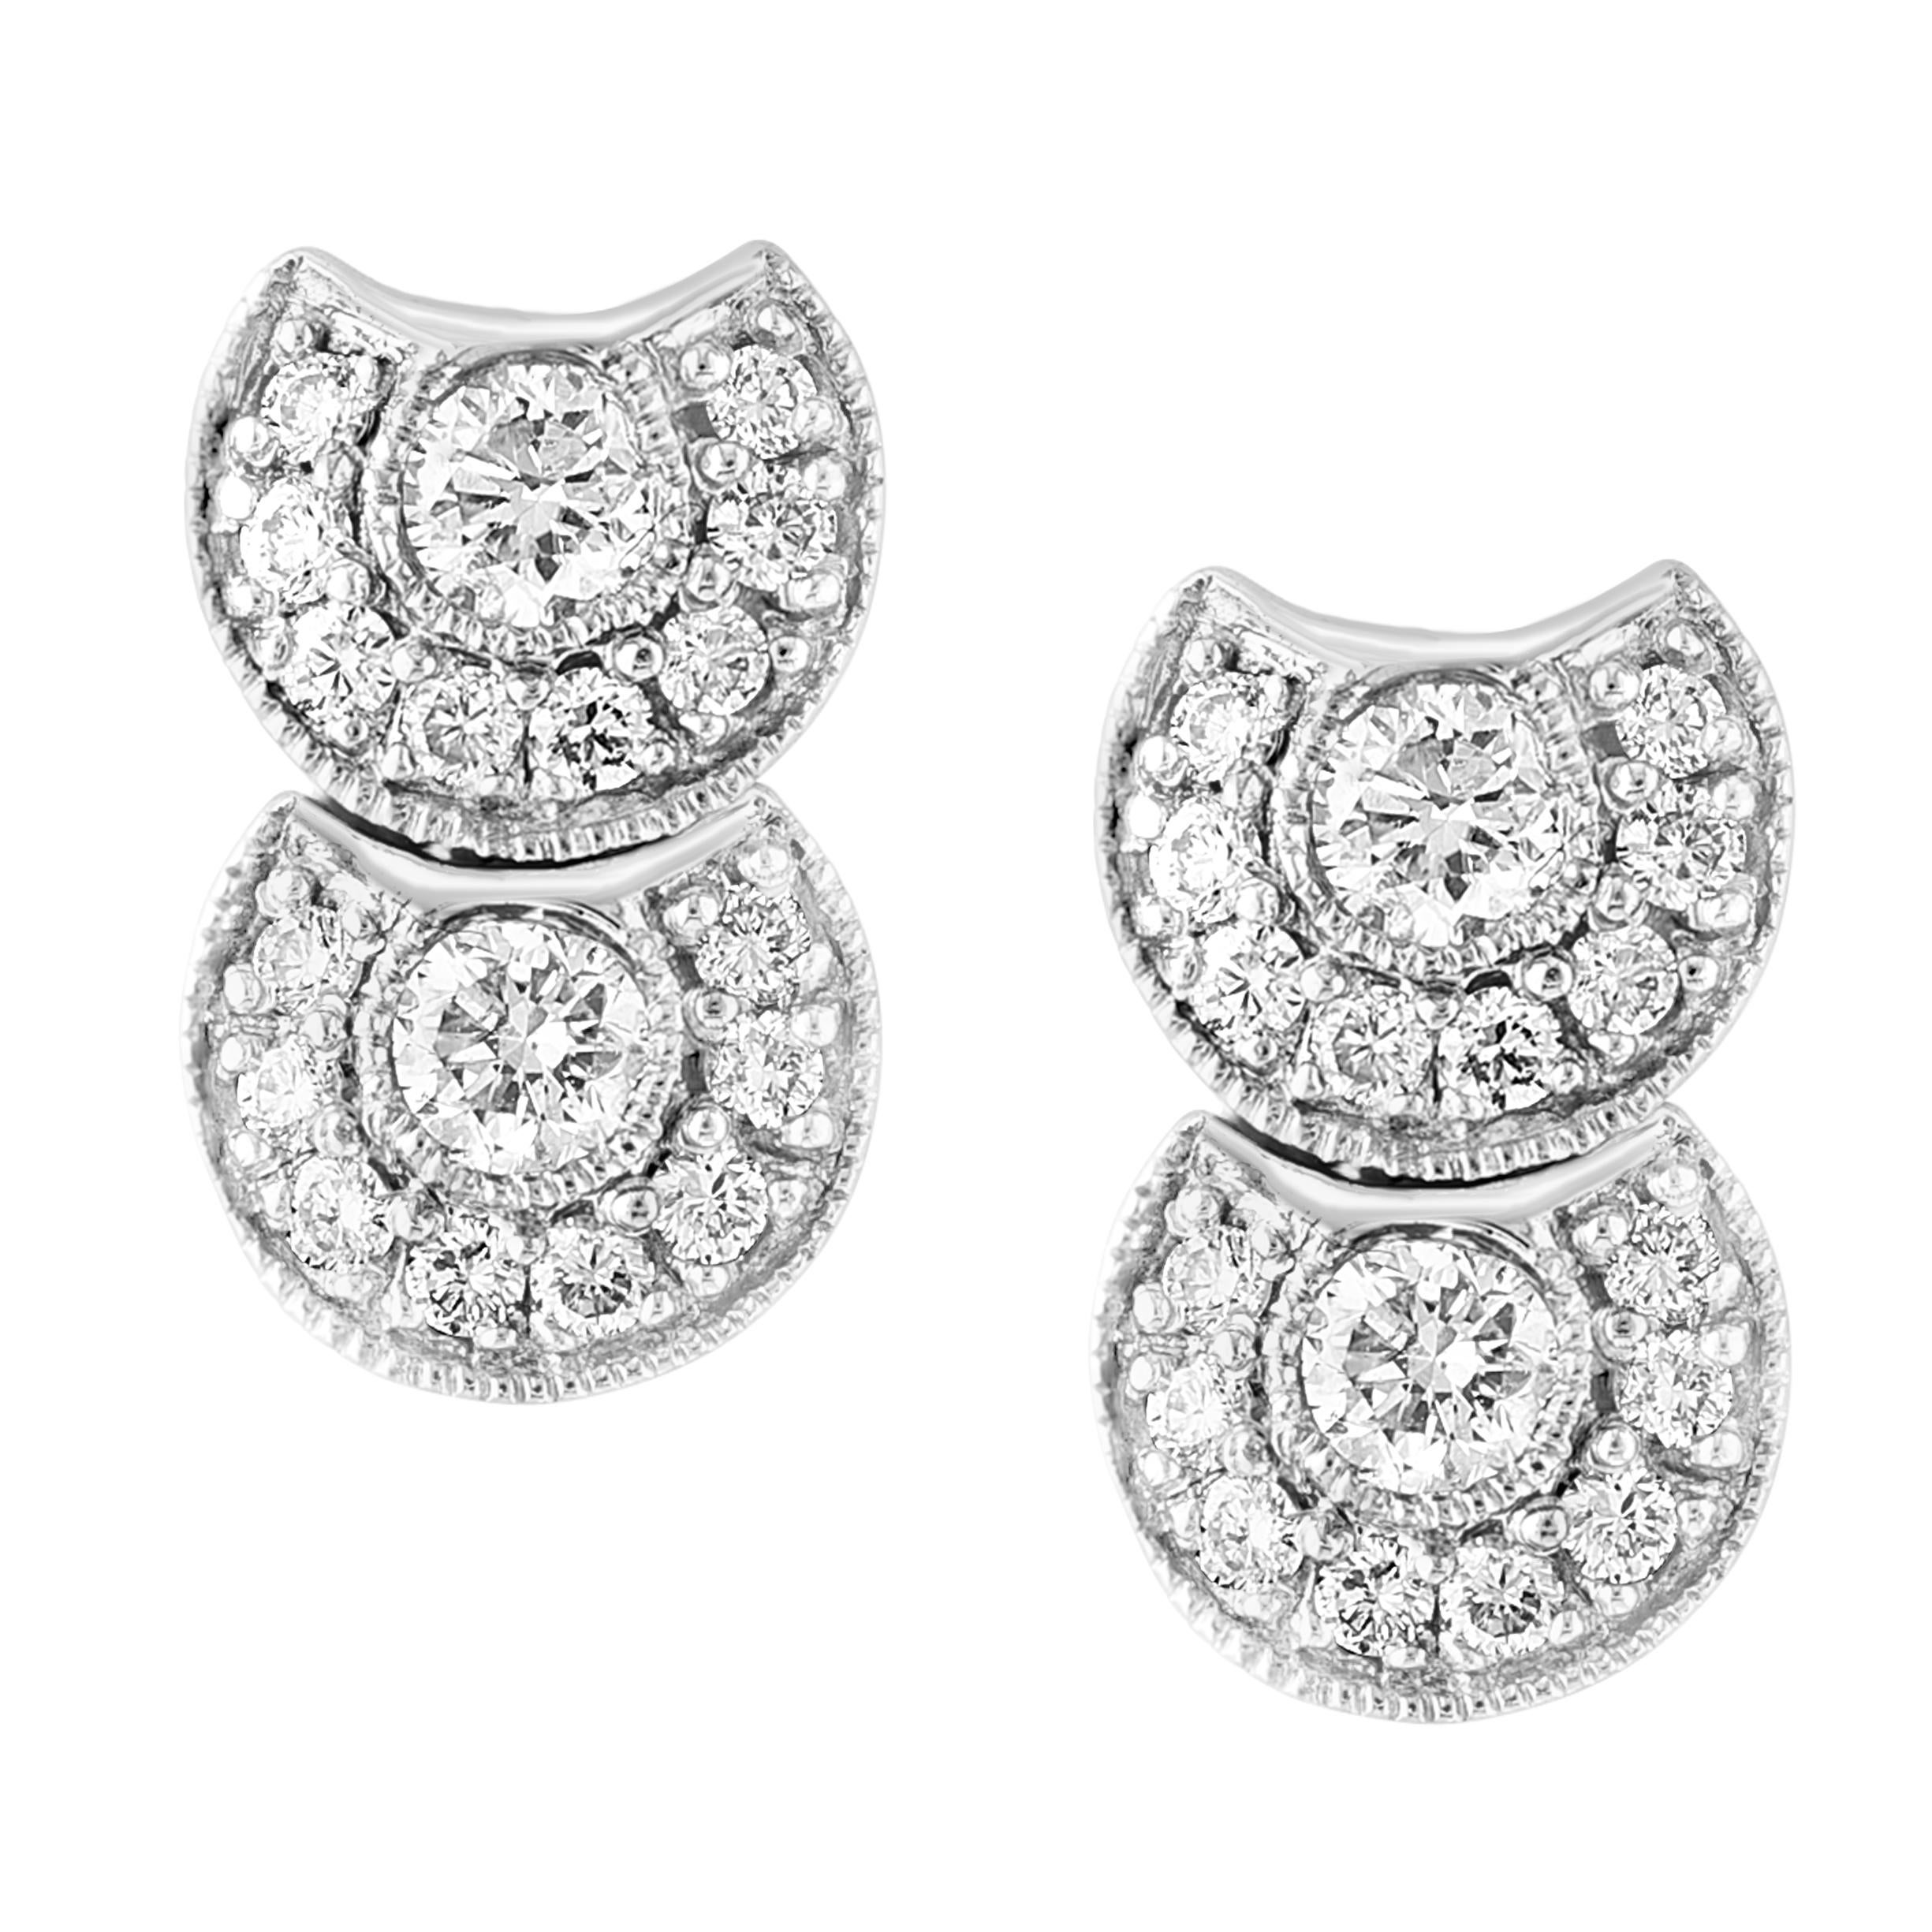 Add a touch of sweet and shimmery style to any day of the week with these beautiful stud earrings. These earrings feature clusters of round brilliant-cut diamonds, totaling 1.0 carat in weight. Set in 14 karat white gold, these diamond cluster stud